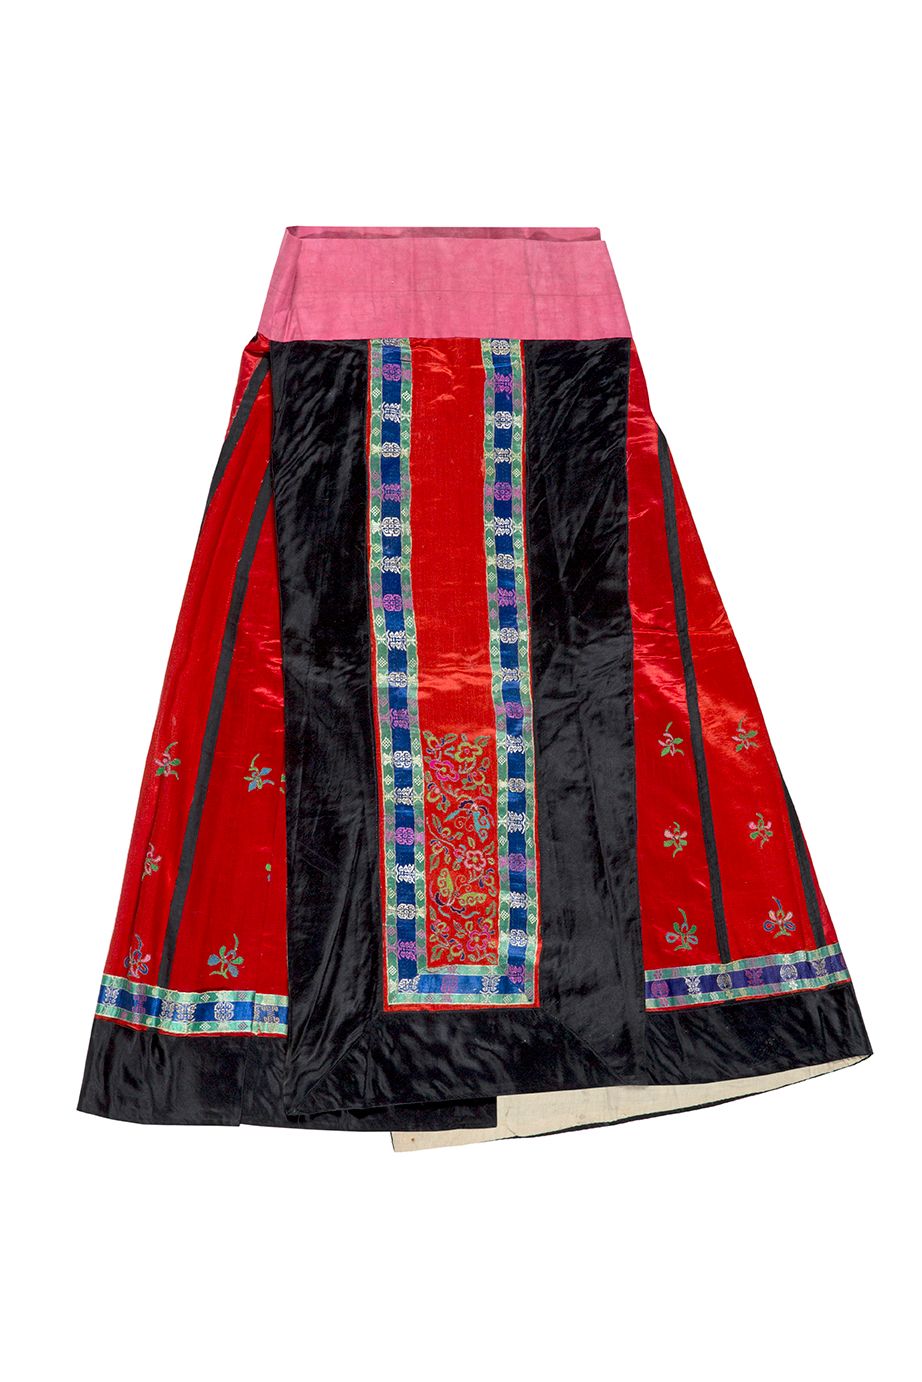 CHINE VERS 1900 Skirt (mang qun)
In red silk satin embroidered with polychrome t&hellip;